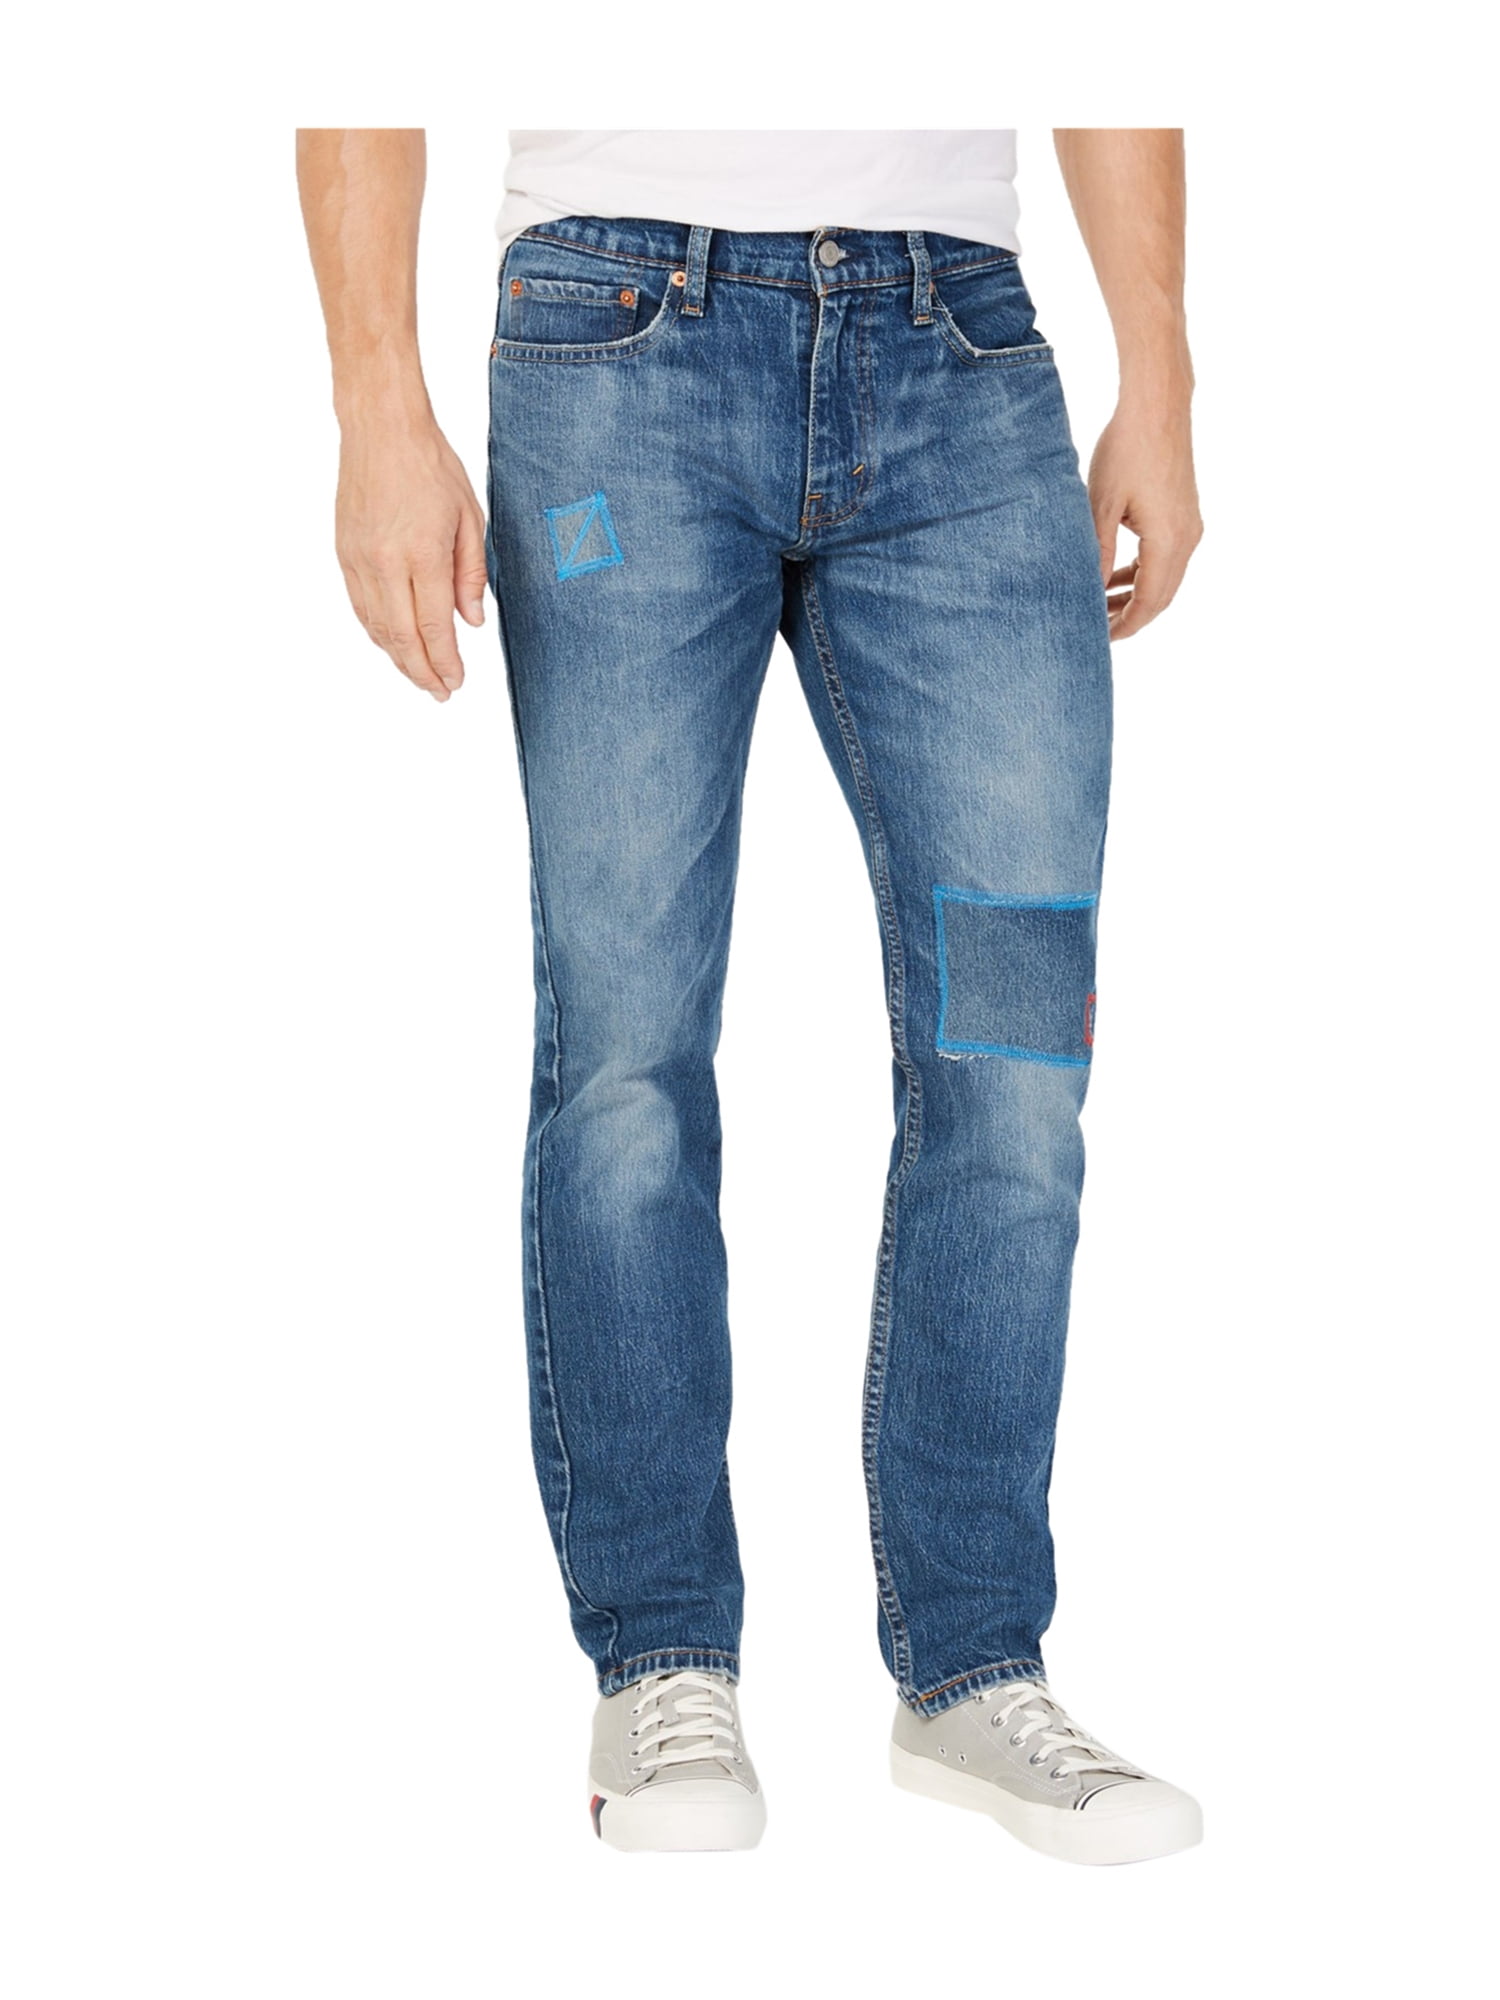 Levis Mens 511 Embroidered Slim Fit Jeans medblue 31x30 | Walmart Canada